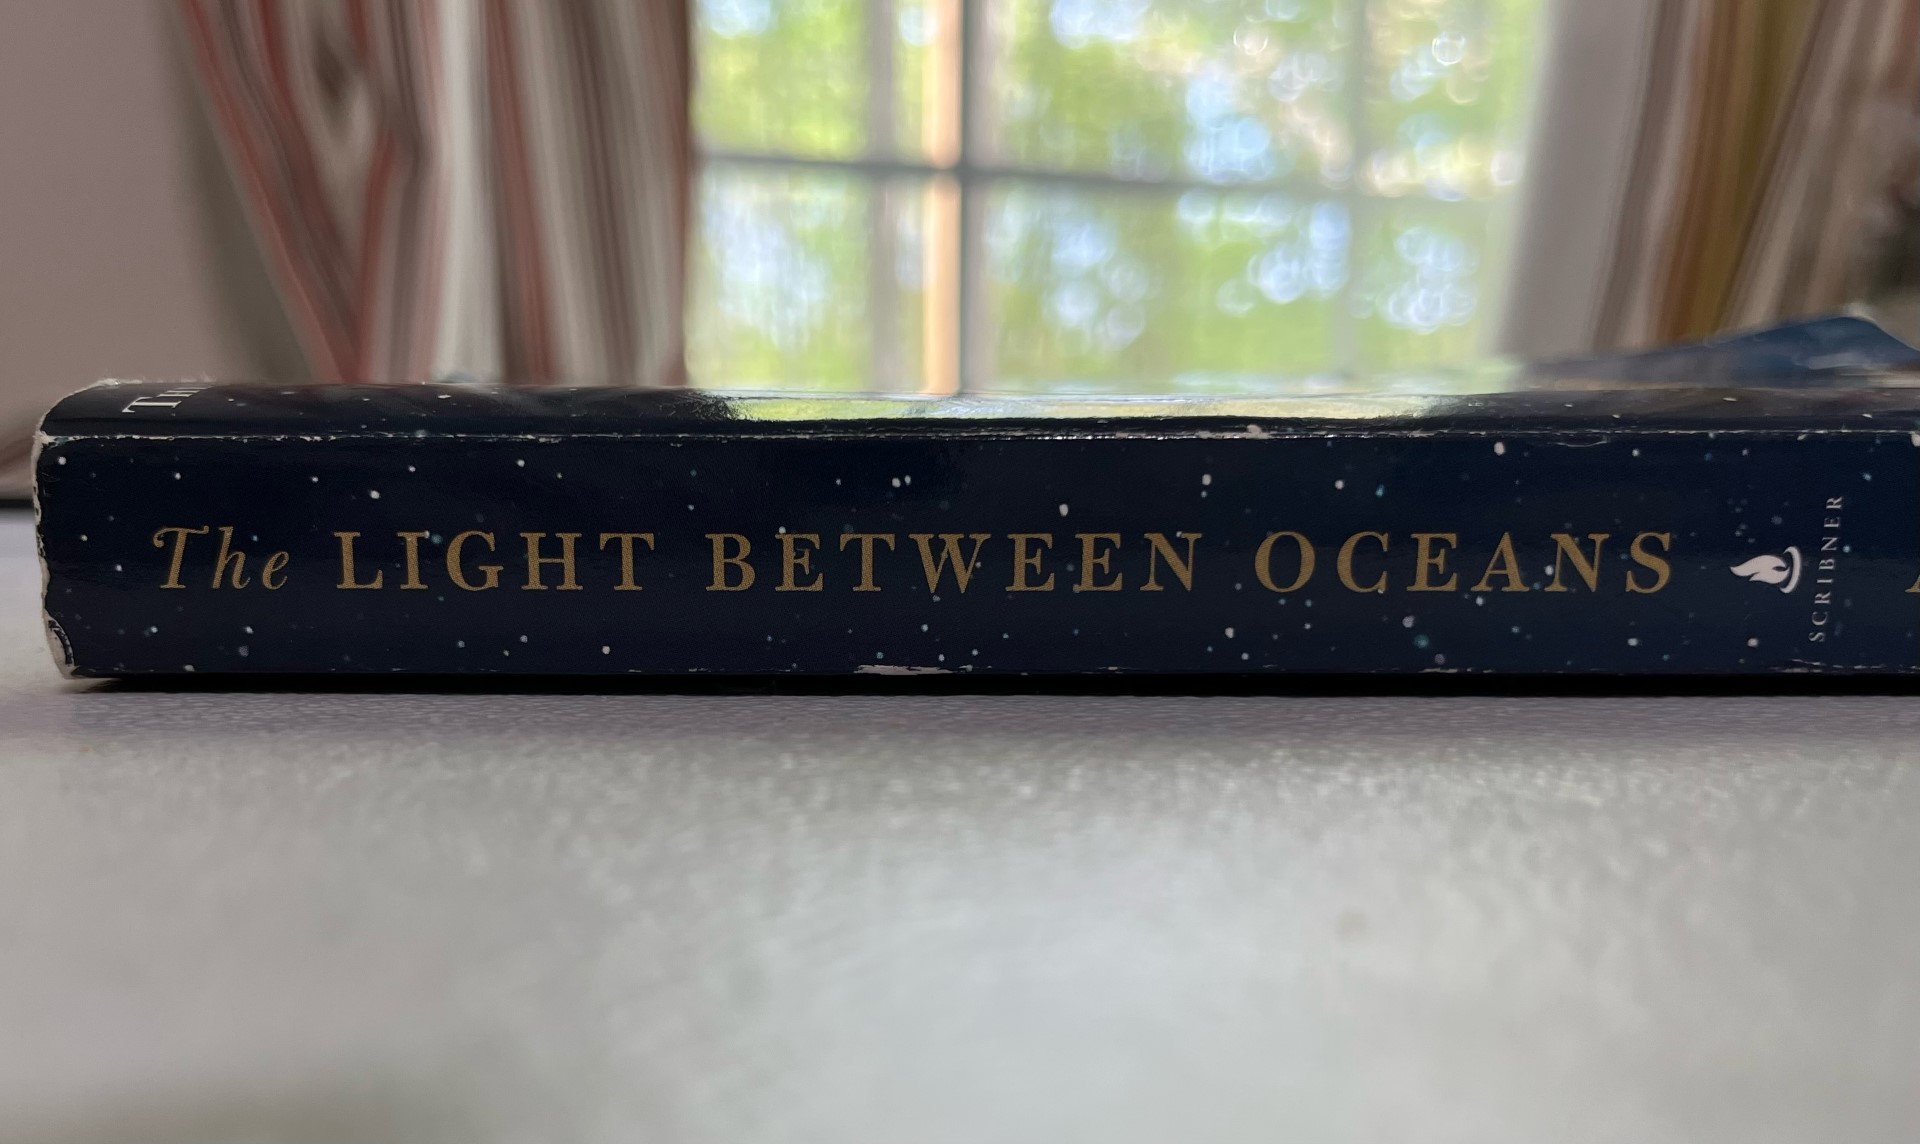 The Question of Morality: The Light Between Oceans